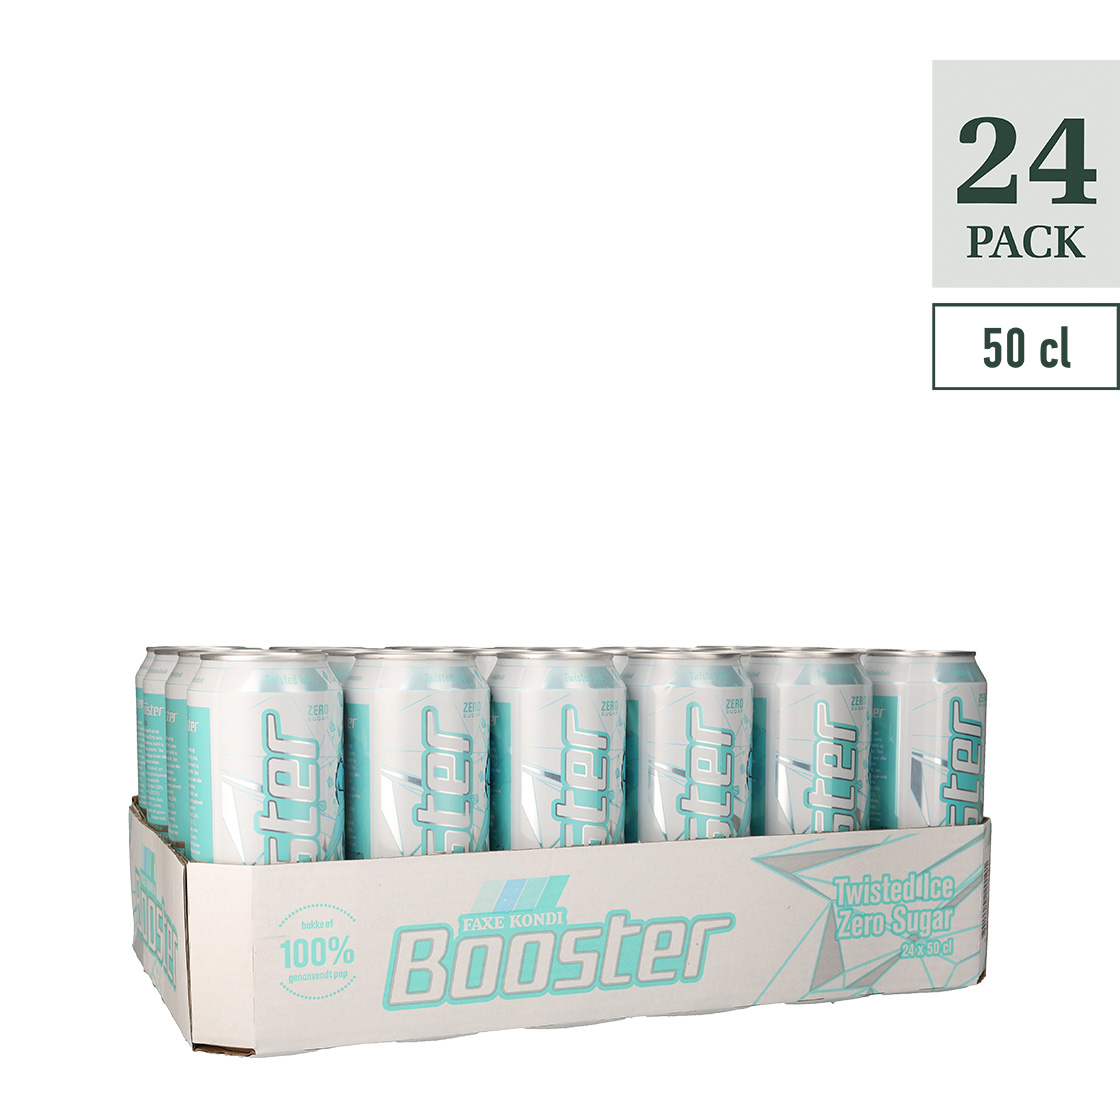 BOOSTER TWISTED ICE 50CL DS 72/24/50